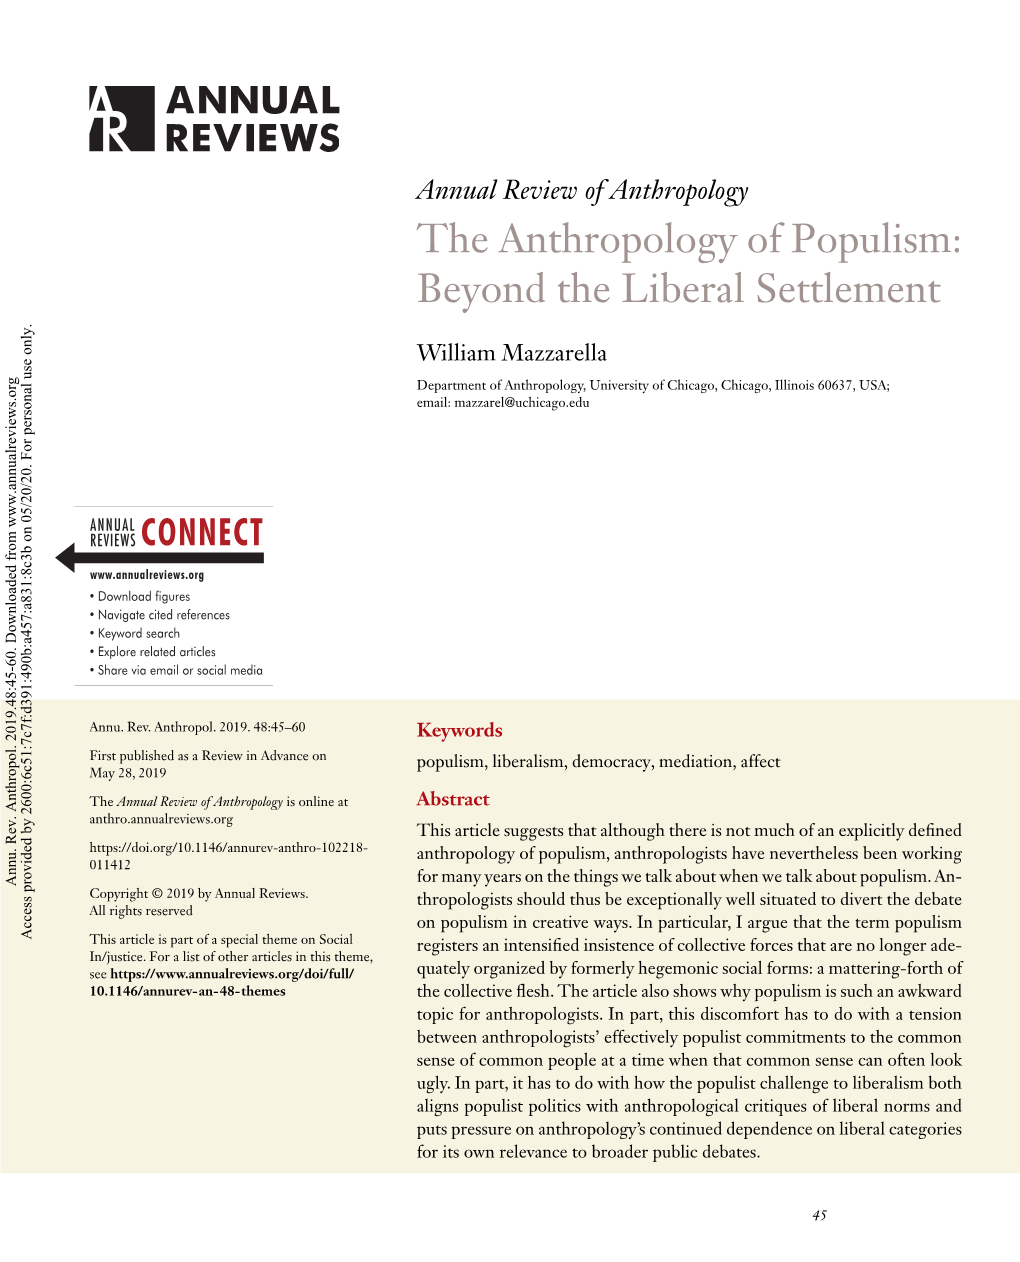 The Anthropology of Populism: Beyond the Liberal Settlement